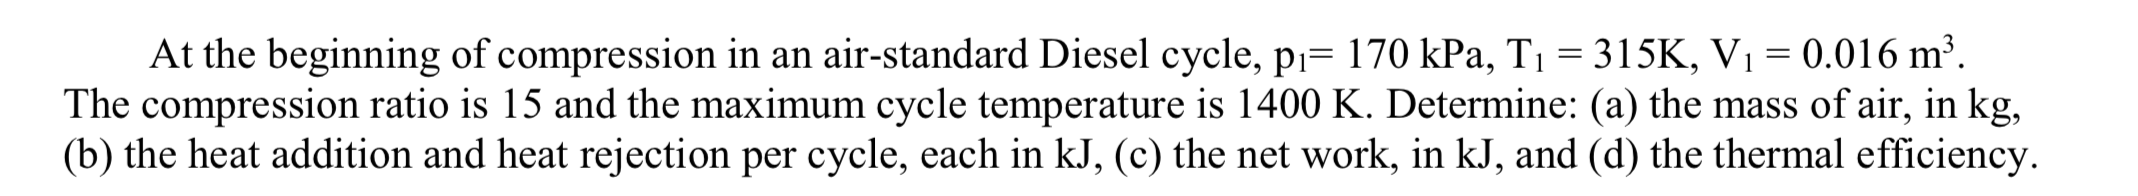 At the beginning of compression in an air-standard Diesel cycle, p= 170 kPa, T 315K, V1 0.016 m2
The compression ratio is 15 and the maximum cycle temperature is 1400 K. Determine: (a) the mass of air, in kg,
(b) the heat addition and heat rejection per cycle, each in kJ, (c) the net work, in kJ, and (d) the thermal efficiency
